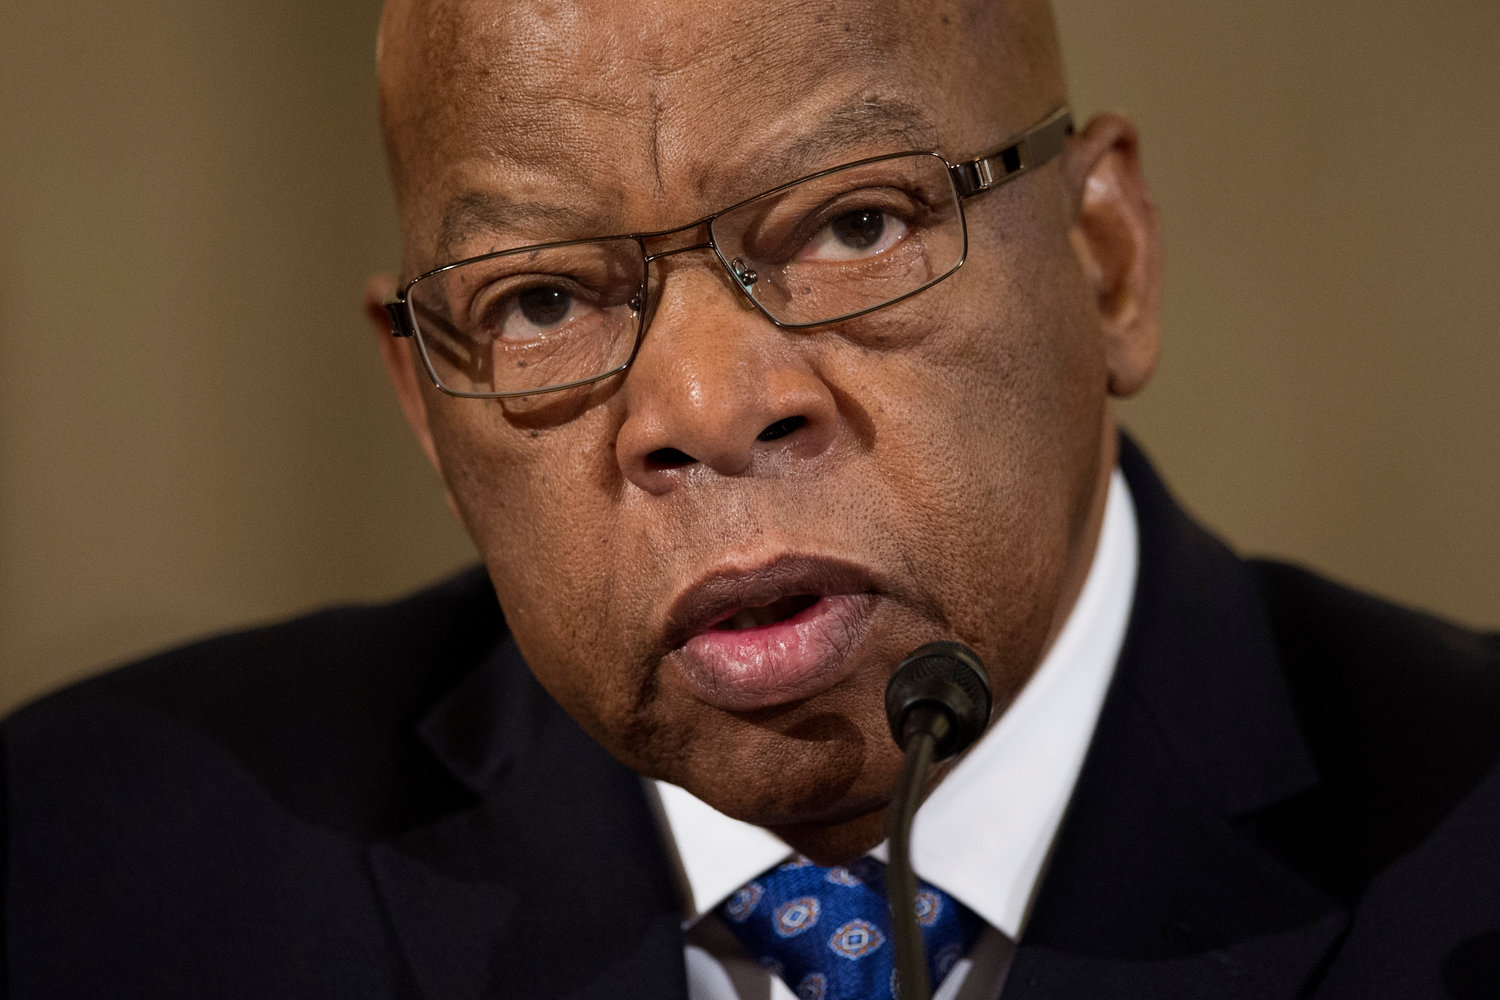 FILE - Former Rep. John Lewis, D-Ga., testifies on Capitol Hill in Washington on Jan. 11, 2017. New York‚Äôs governor signed the John R. Lewis Voting Rights Act, named after the late civil rights activist who represented Georgia in the U.S. House, into law Monday, June 20, 2022, intended to prevent local officials from enacting rules that might suppress people‚Äôs voting rights because of their race. (AP Photo/Cliff Owen, File)